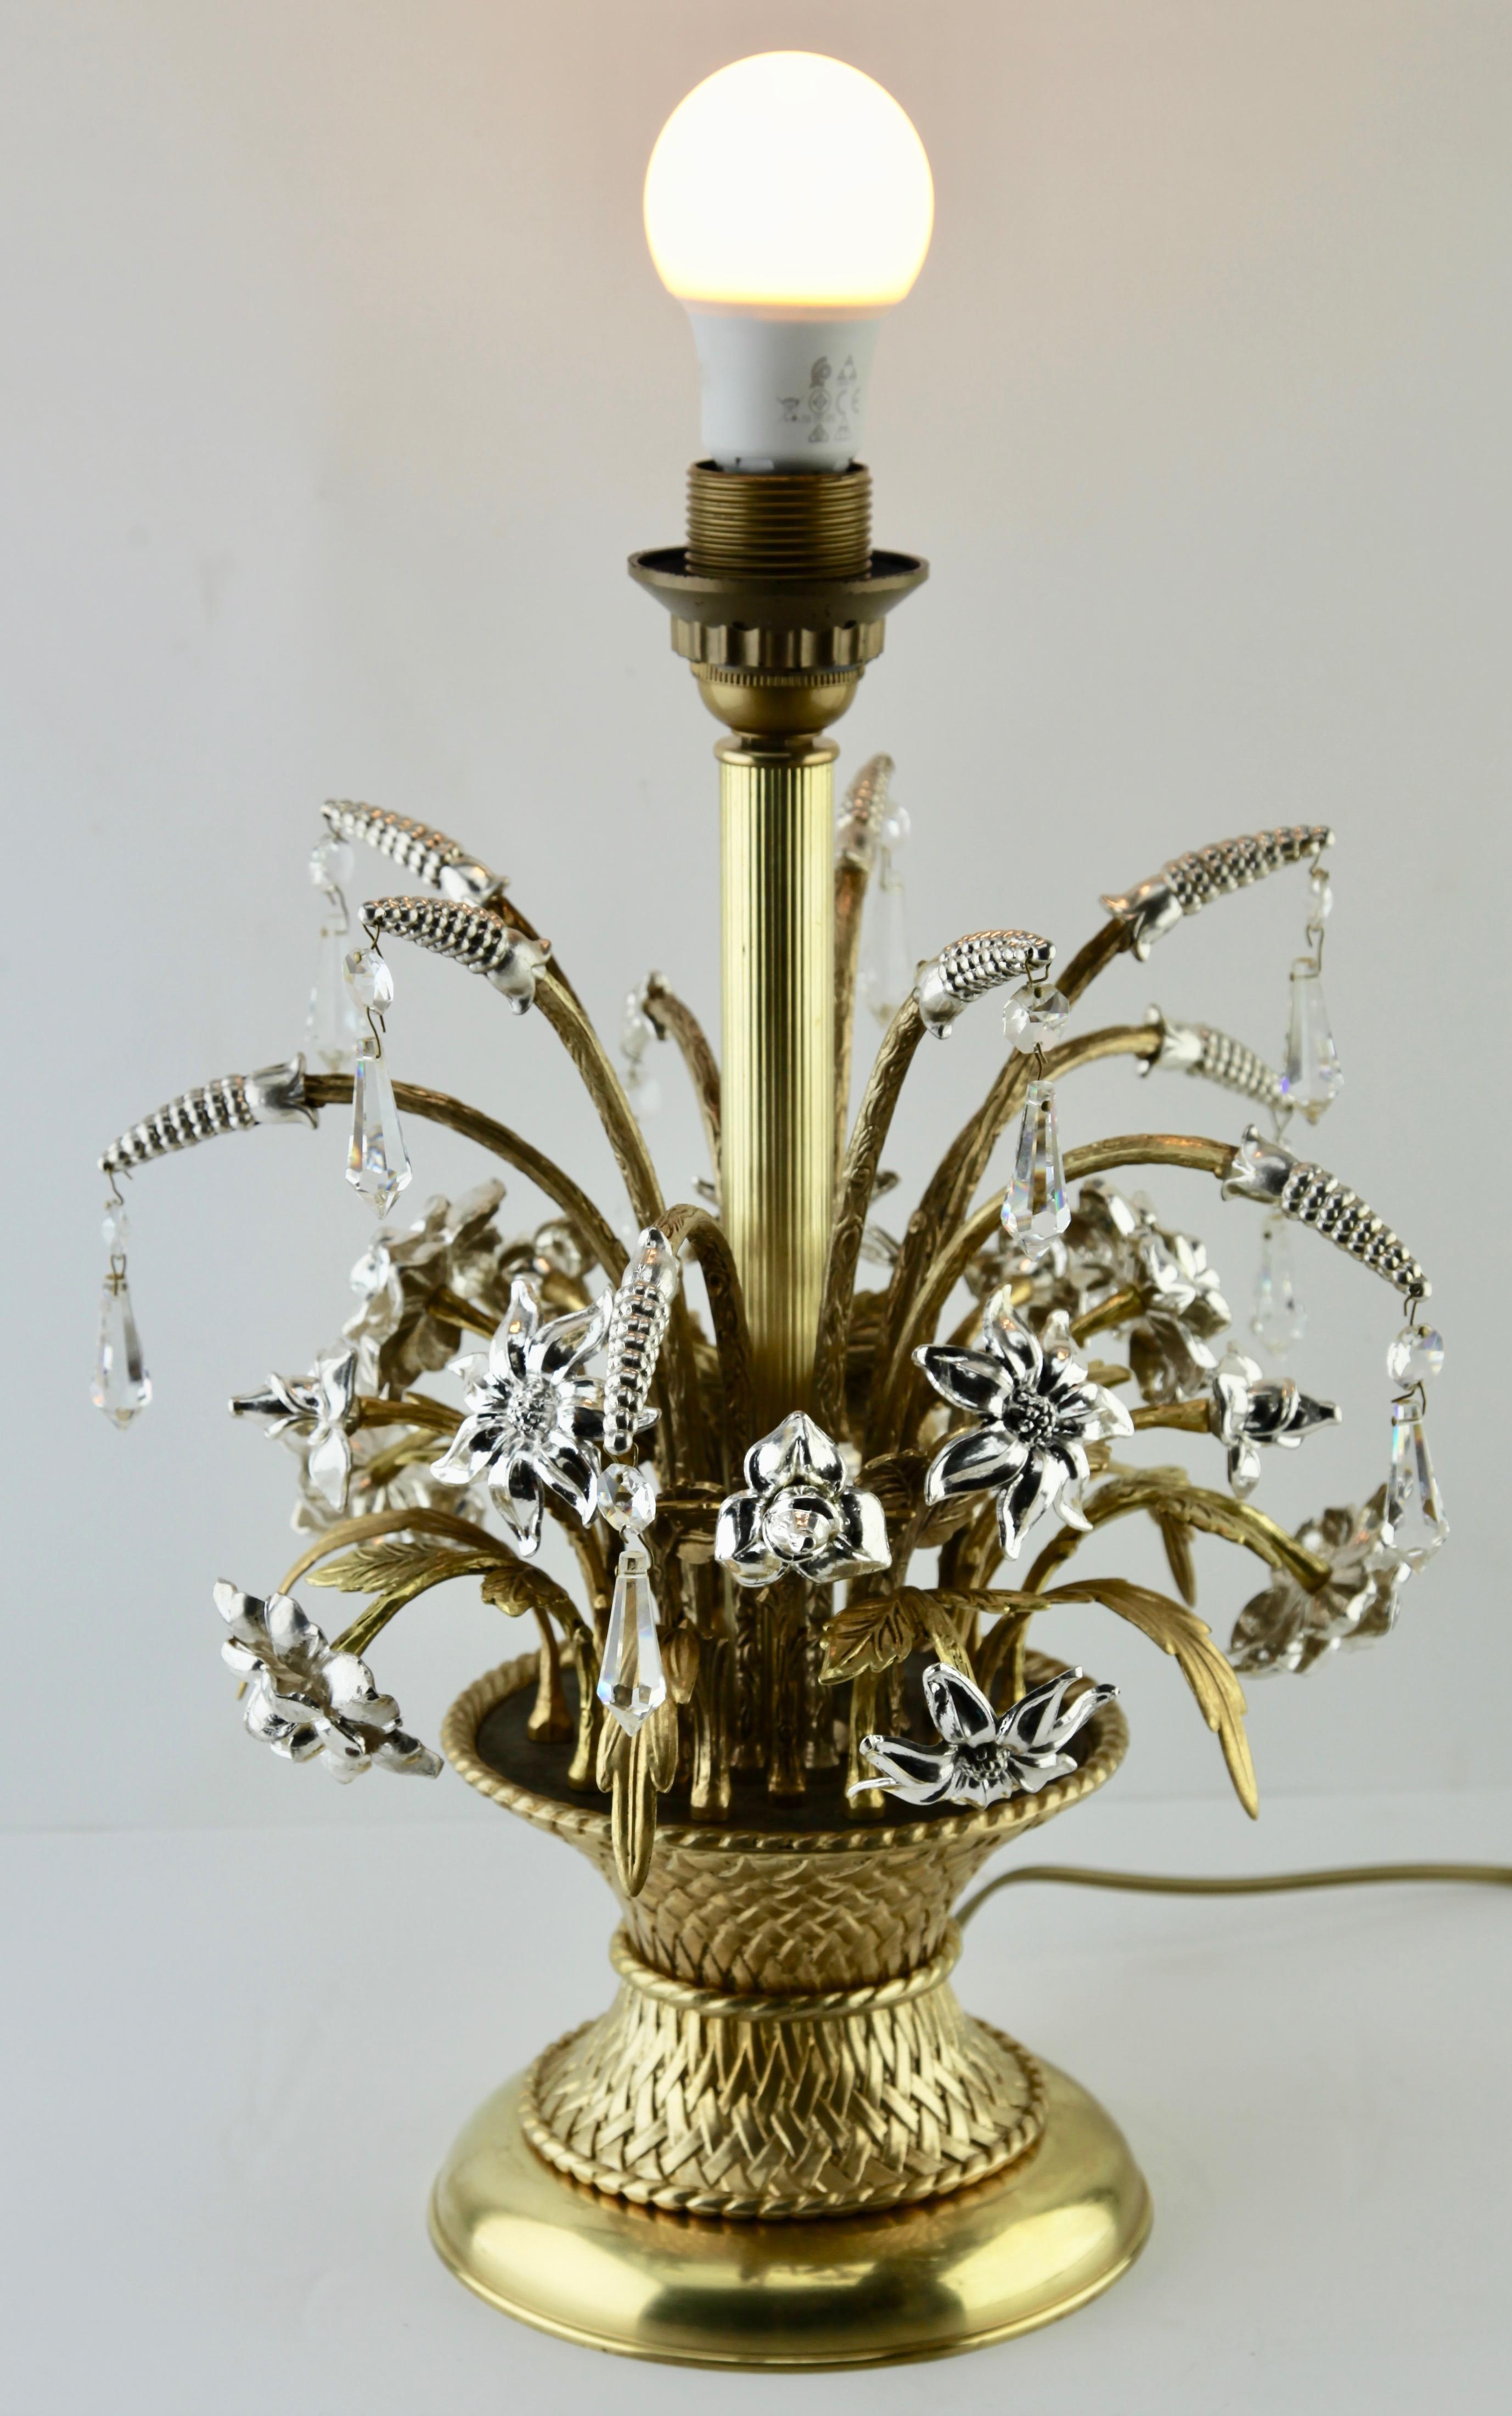 Lamp Representing a Bouquet of Brass and Silver Metal Flowers in a Basket, 1960s For Sale 4